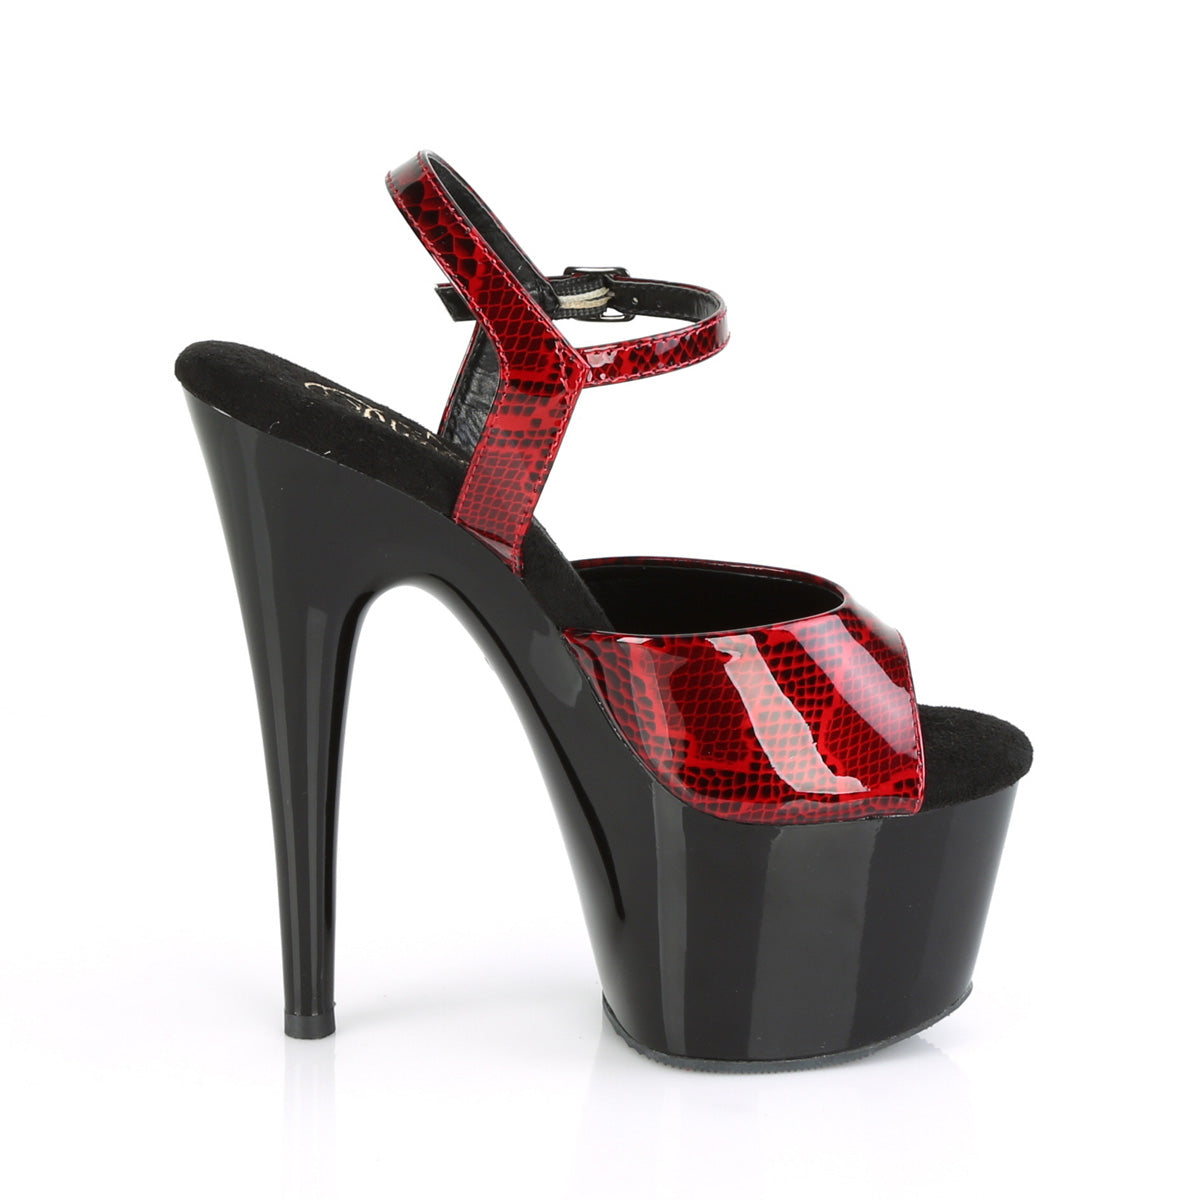 ADORE-709SP/RSPPT/B 7" PLEASER FAST DELIVERY 24-48h